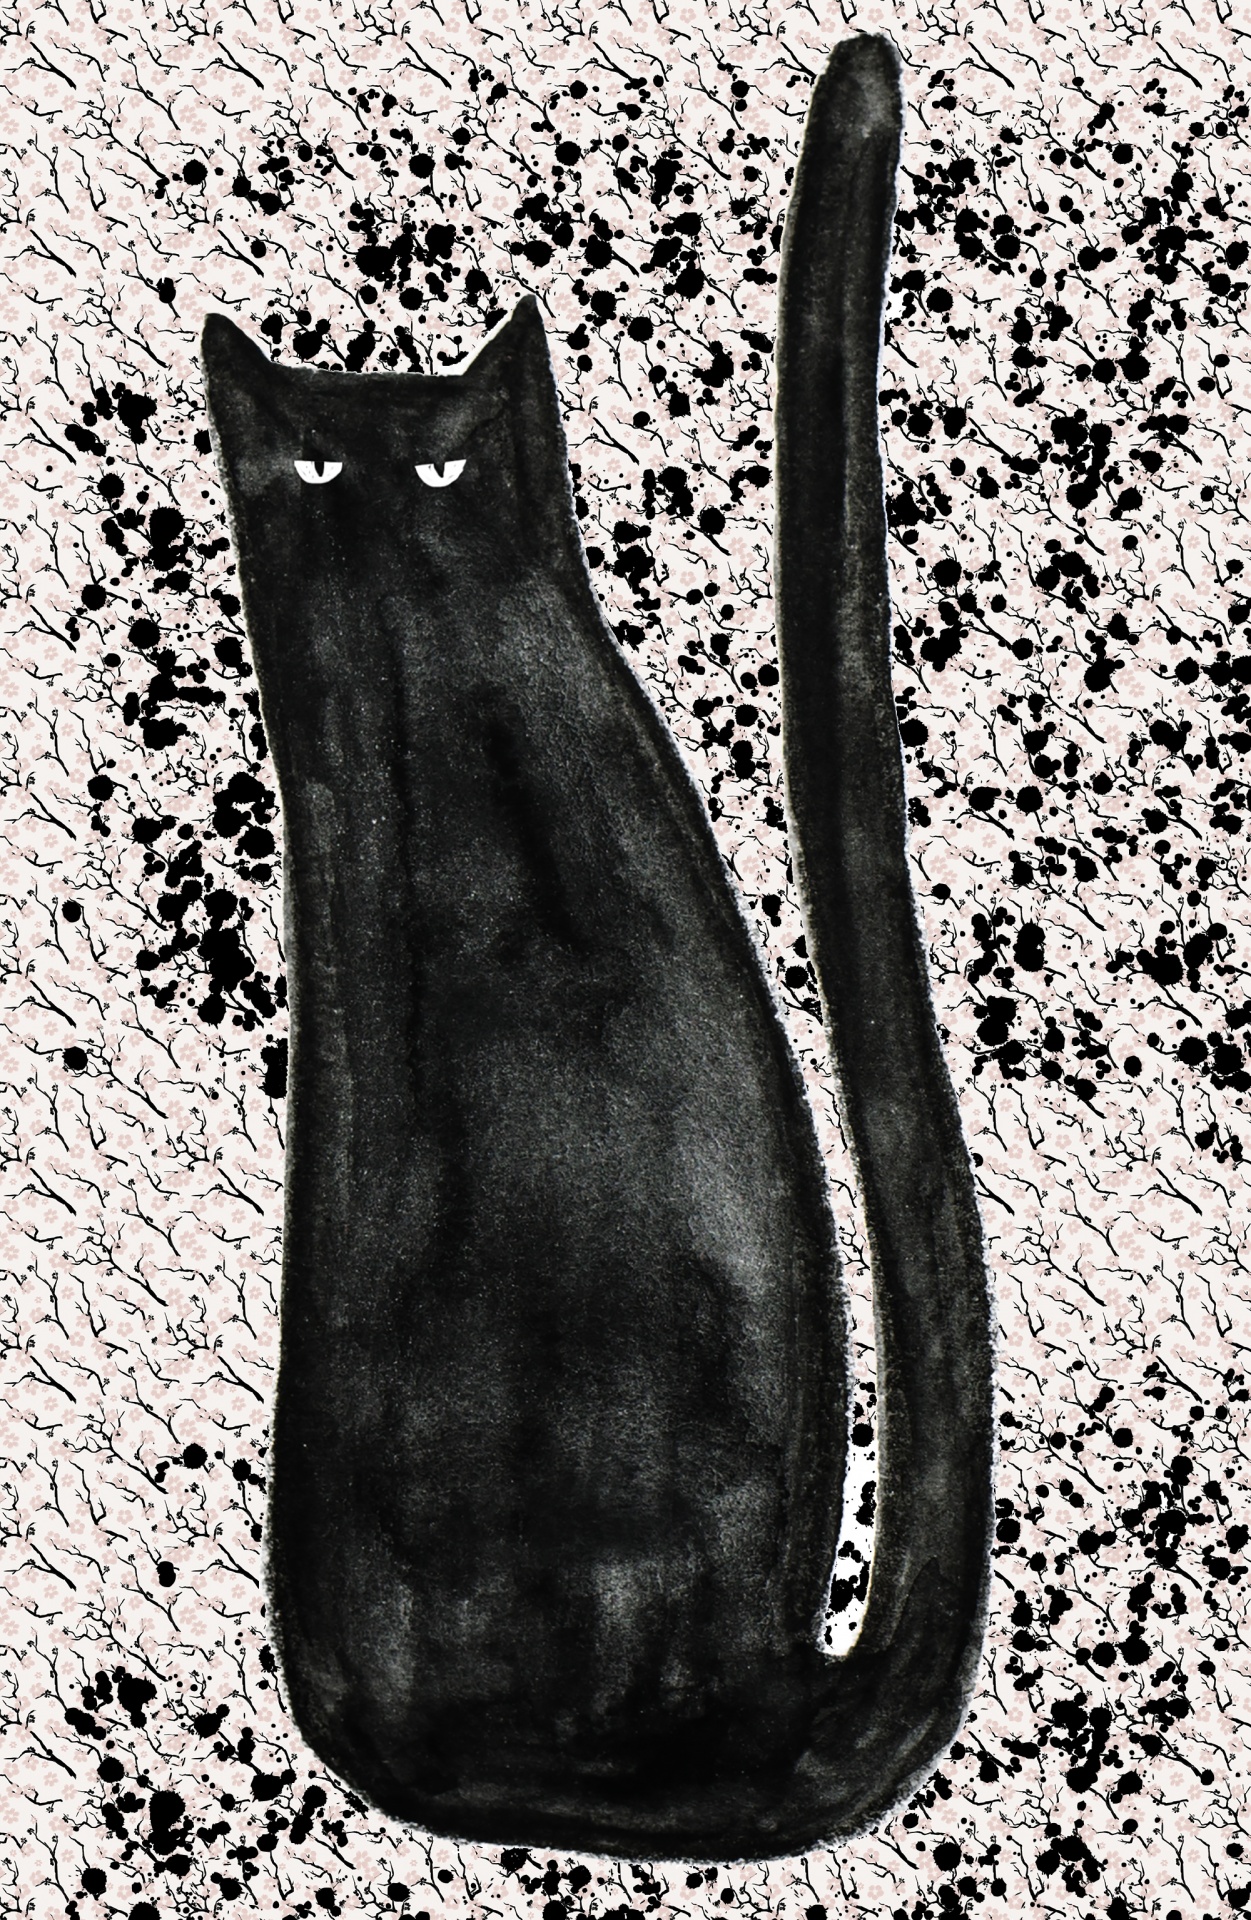 minimalist art of a black cat on black and white textured background